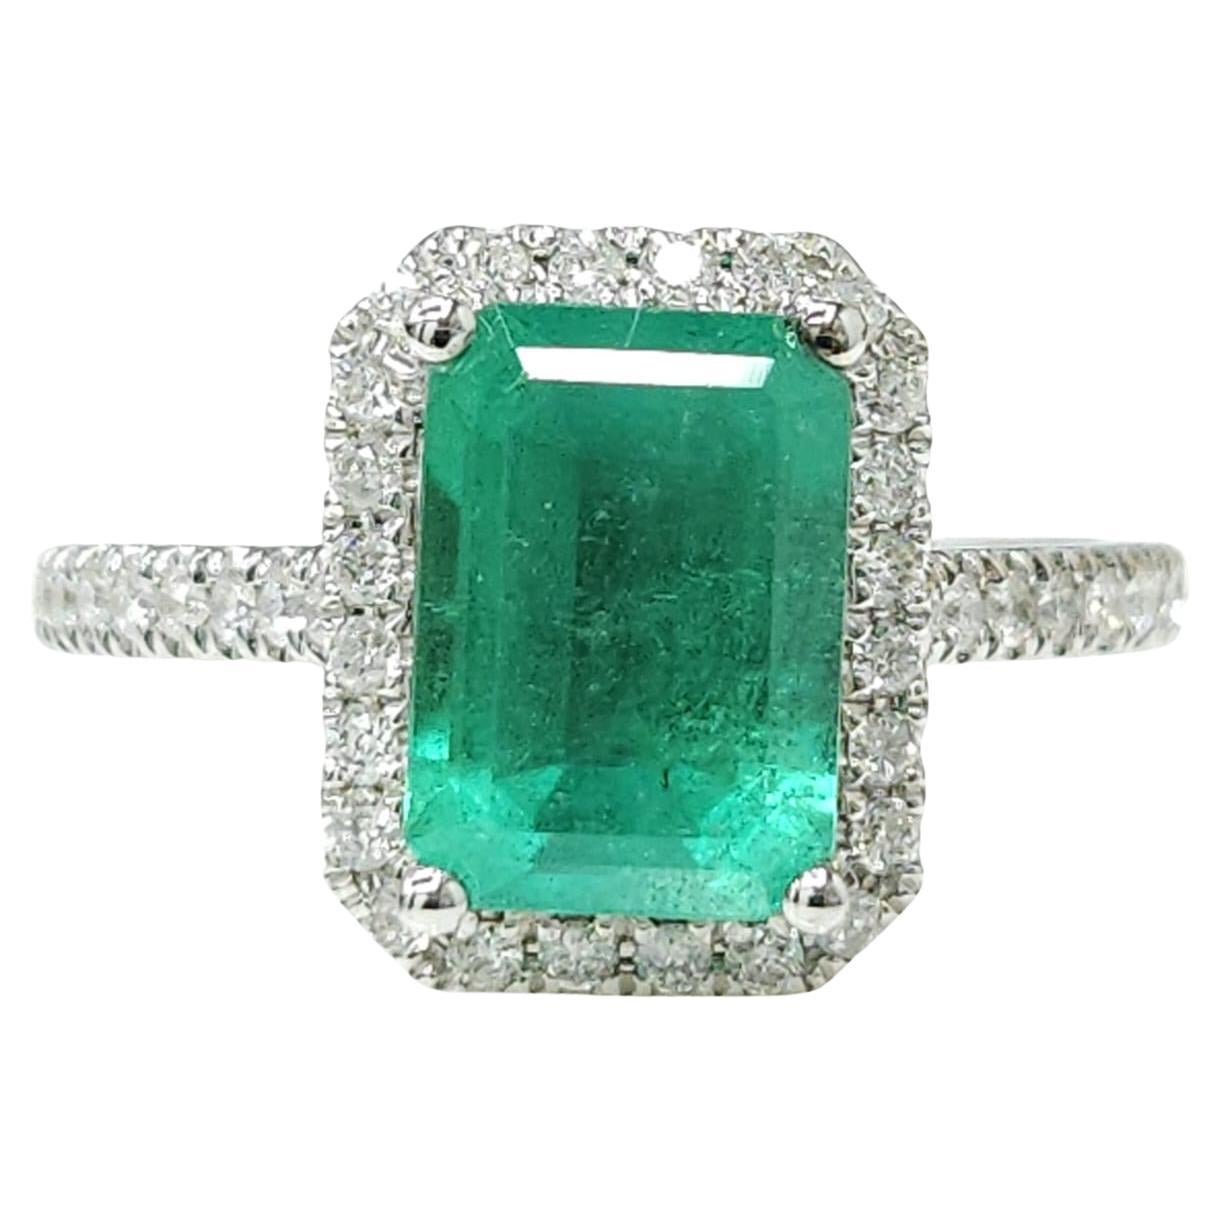 Introducing a stunning piece of jewelry featuring an IGI Certified 1.76 Carat Emerald, originating from Colombia, renowned for its vibrant and intense green color, in a captivating emerald shape. This remarkable gemstone takes center stage in a